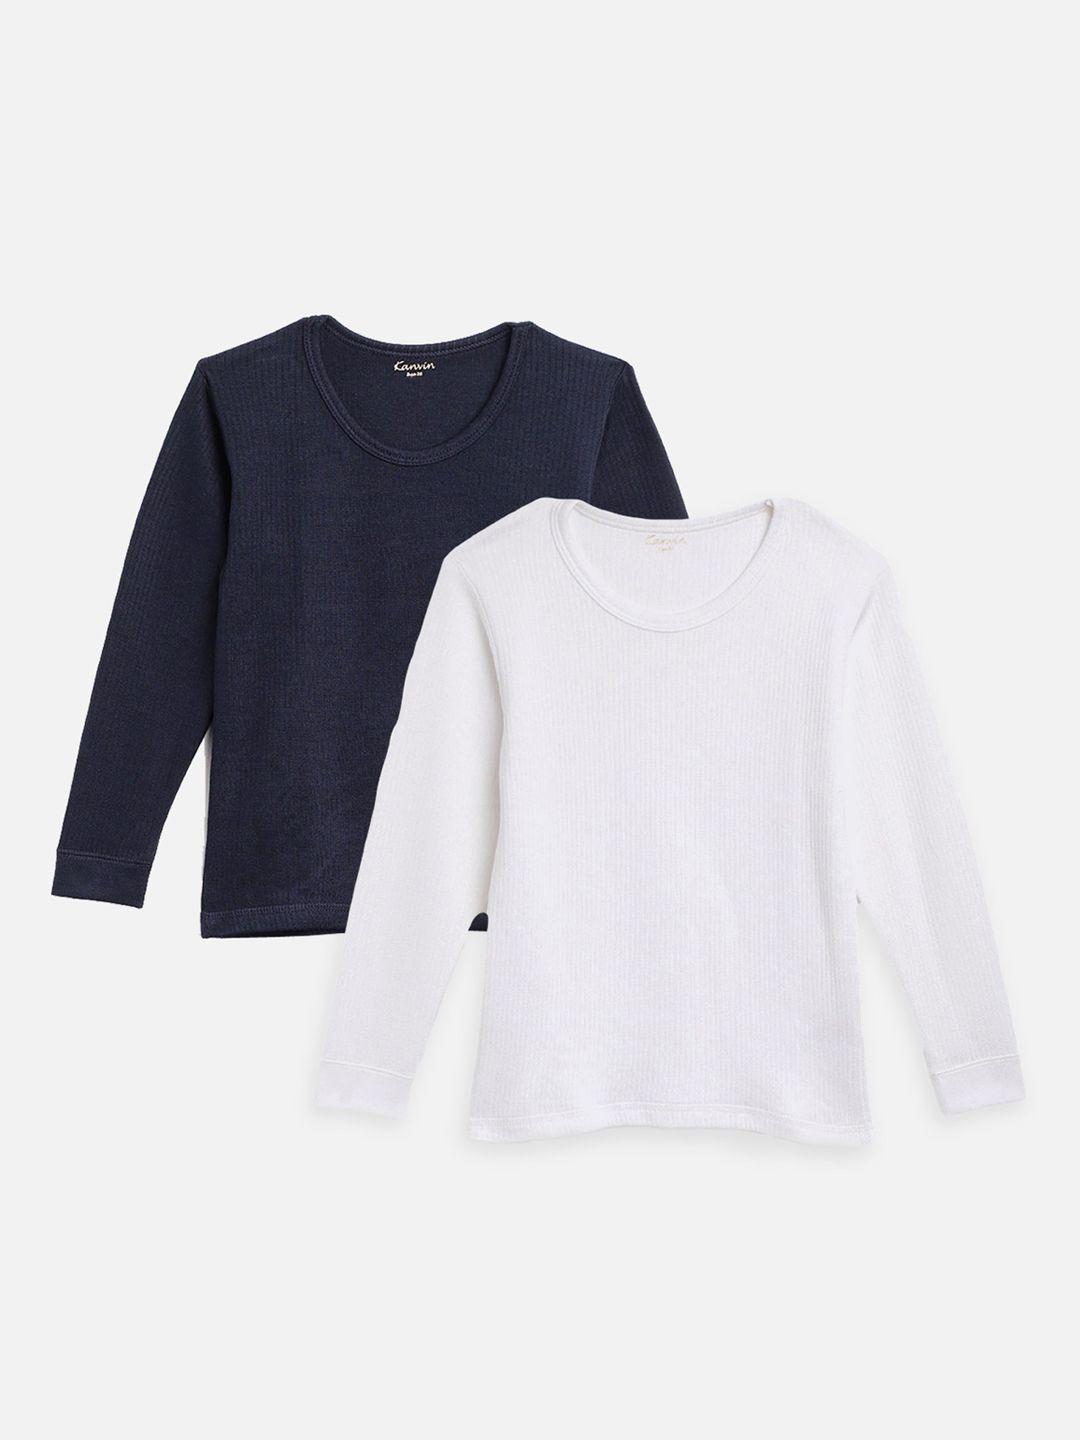 kanvin boys  pack of 2 navy blue & white ribbed cotton thermal tops